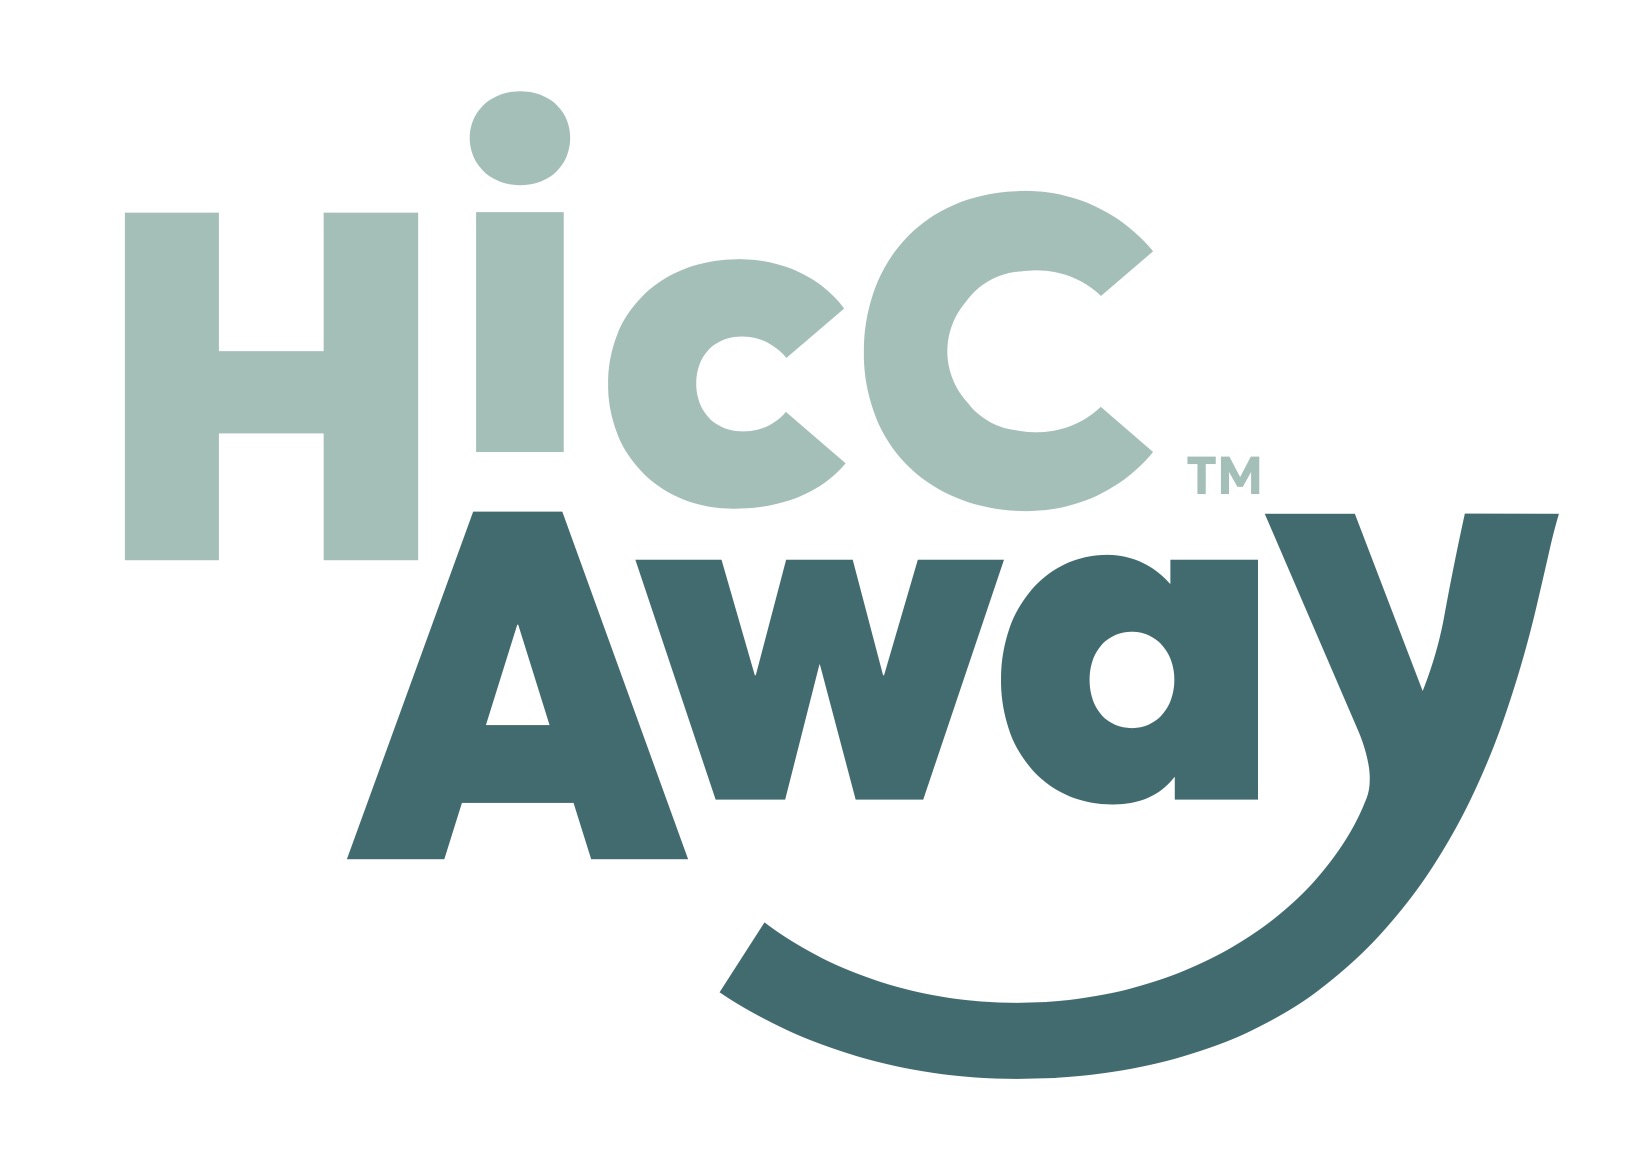 HiccAway Announces Positive Study Results in Journal of the American  Medical Association Paper for its Device to Stop Hiccups